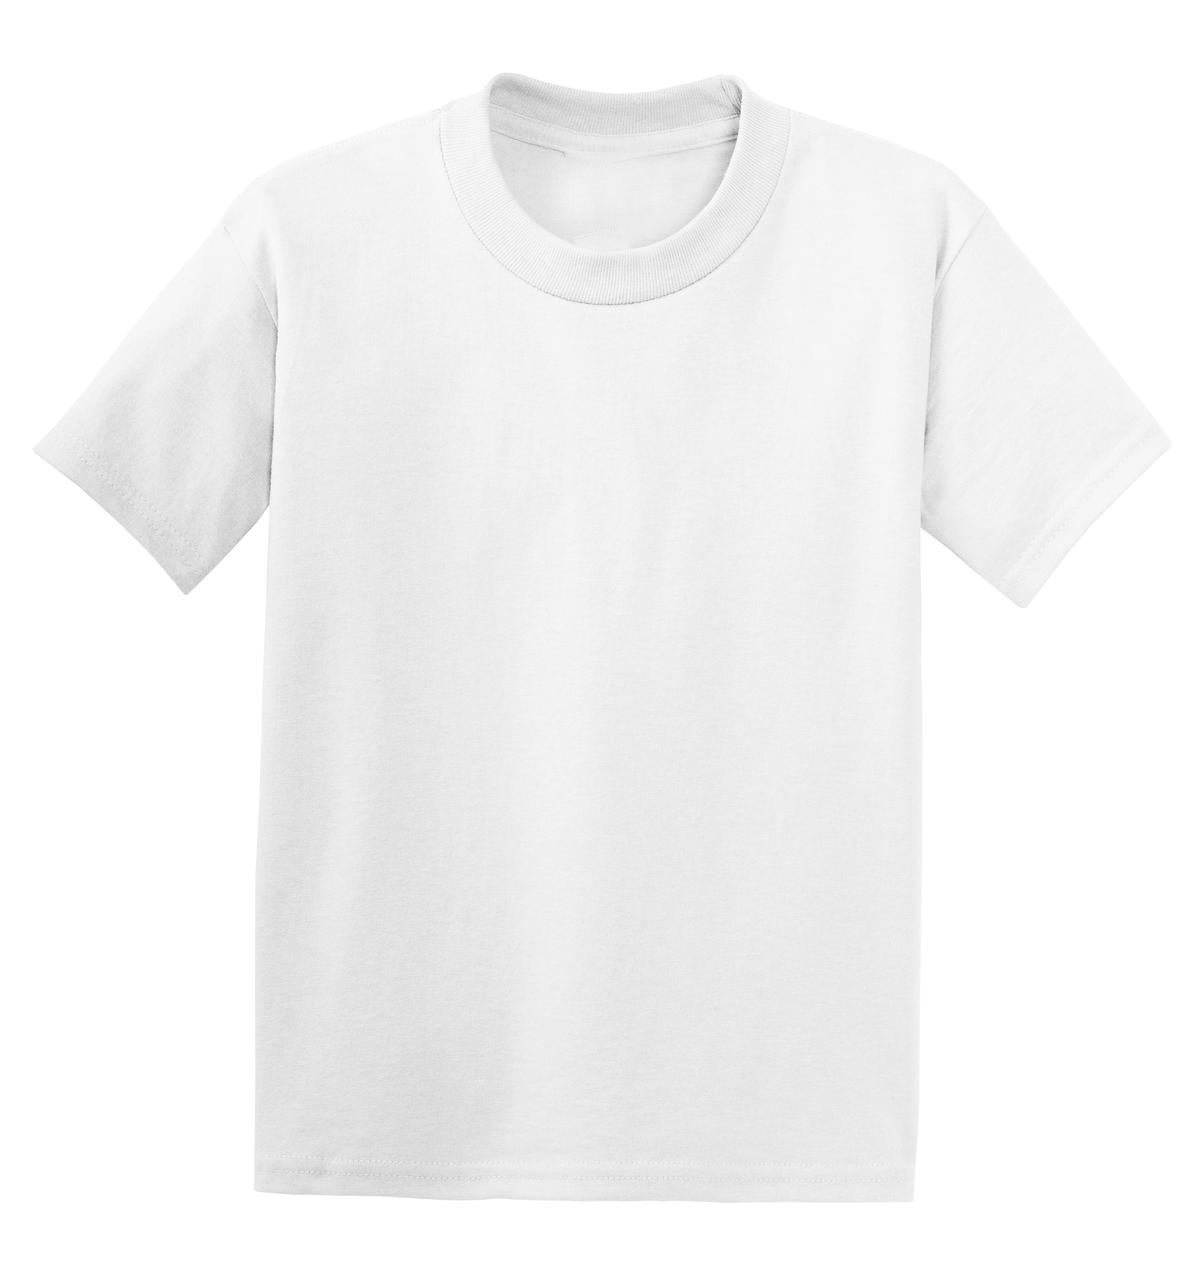 Hanes - Youth EcoSmart 50/50 Cotton/Poly T-Shirt-Hanes